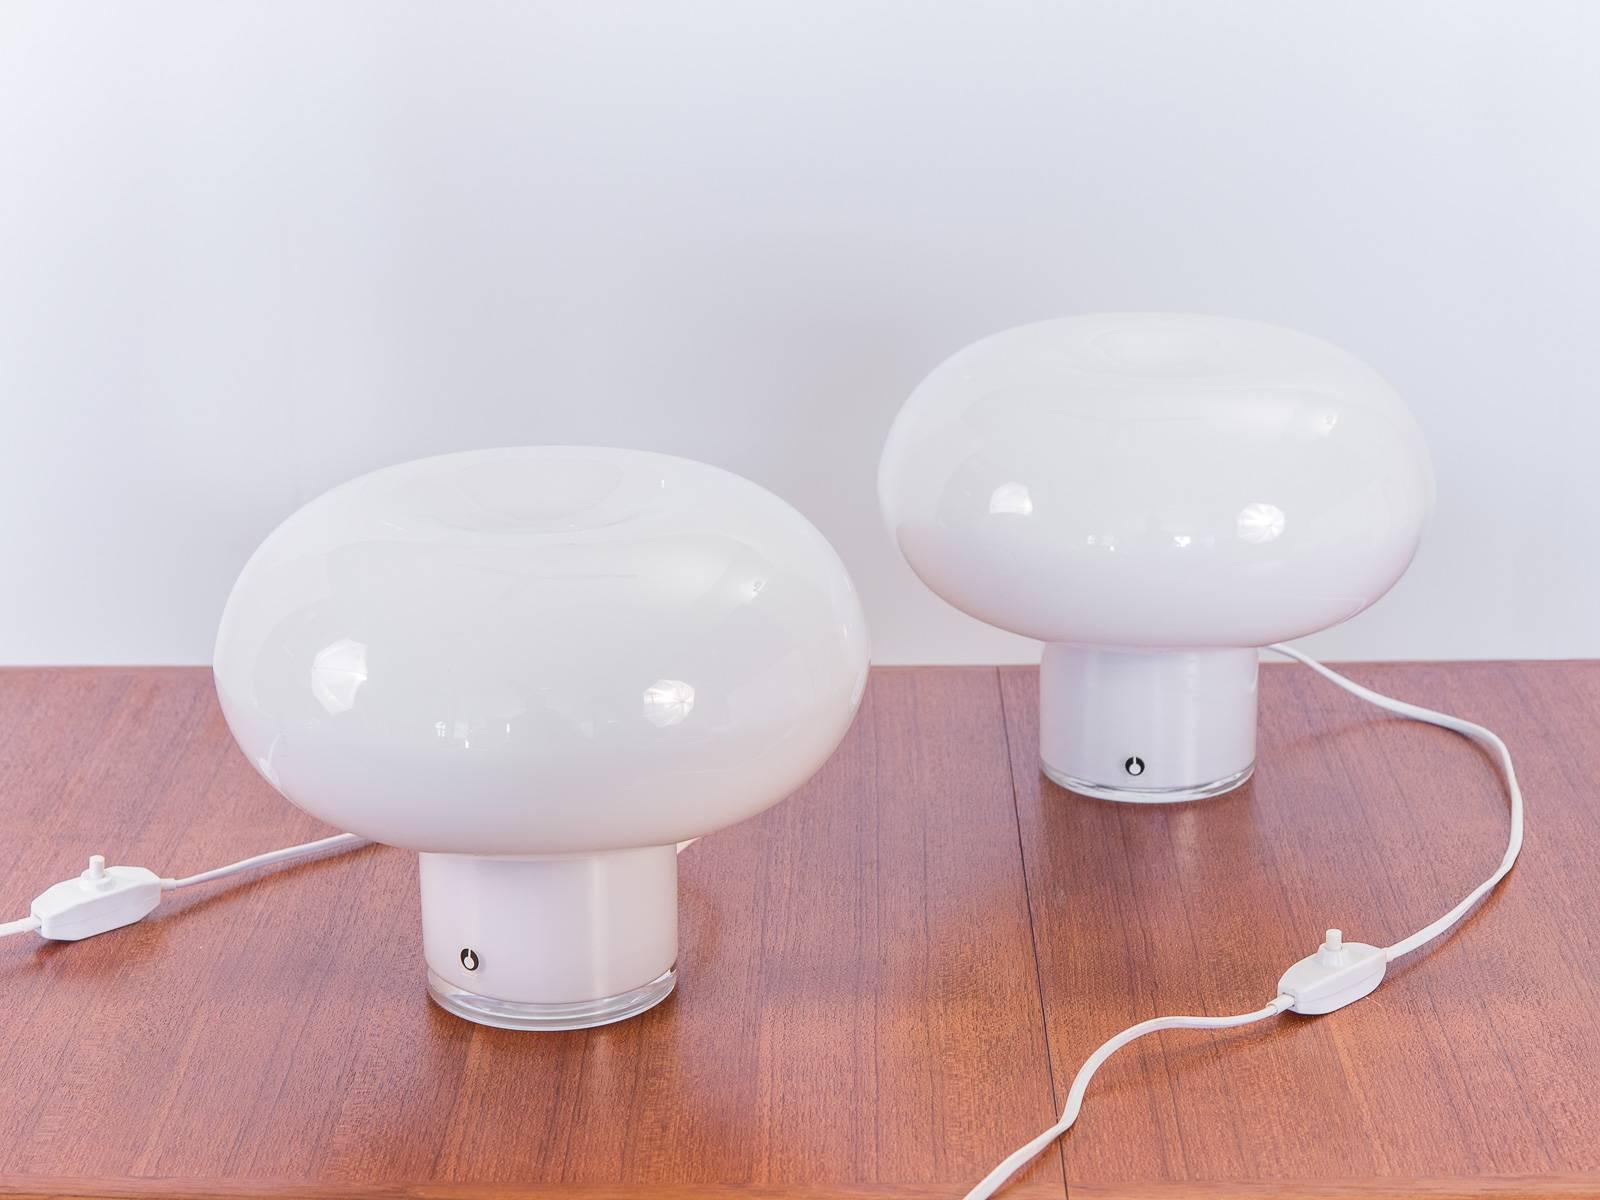 Scarce pair of minimal, white glass table lamps for Pukeberg, Sweden. The spherical, ellipsoid shade sits on top of the glass stem for a low, attractive profile. Glass is very clean with no visible scratches. Adorn your sideboard or bedside with